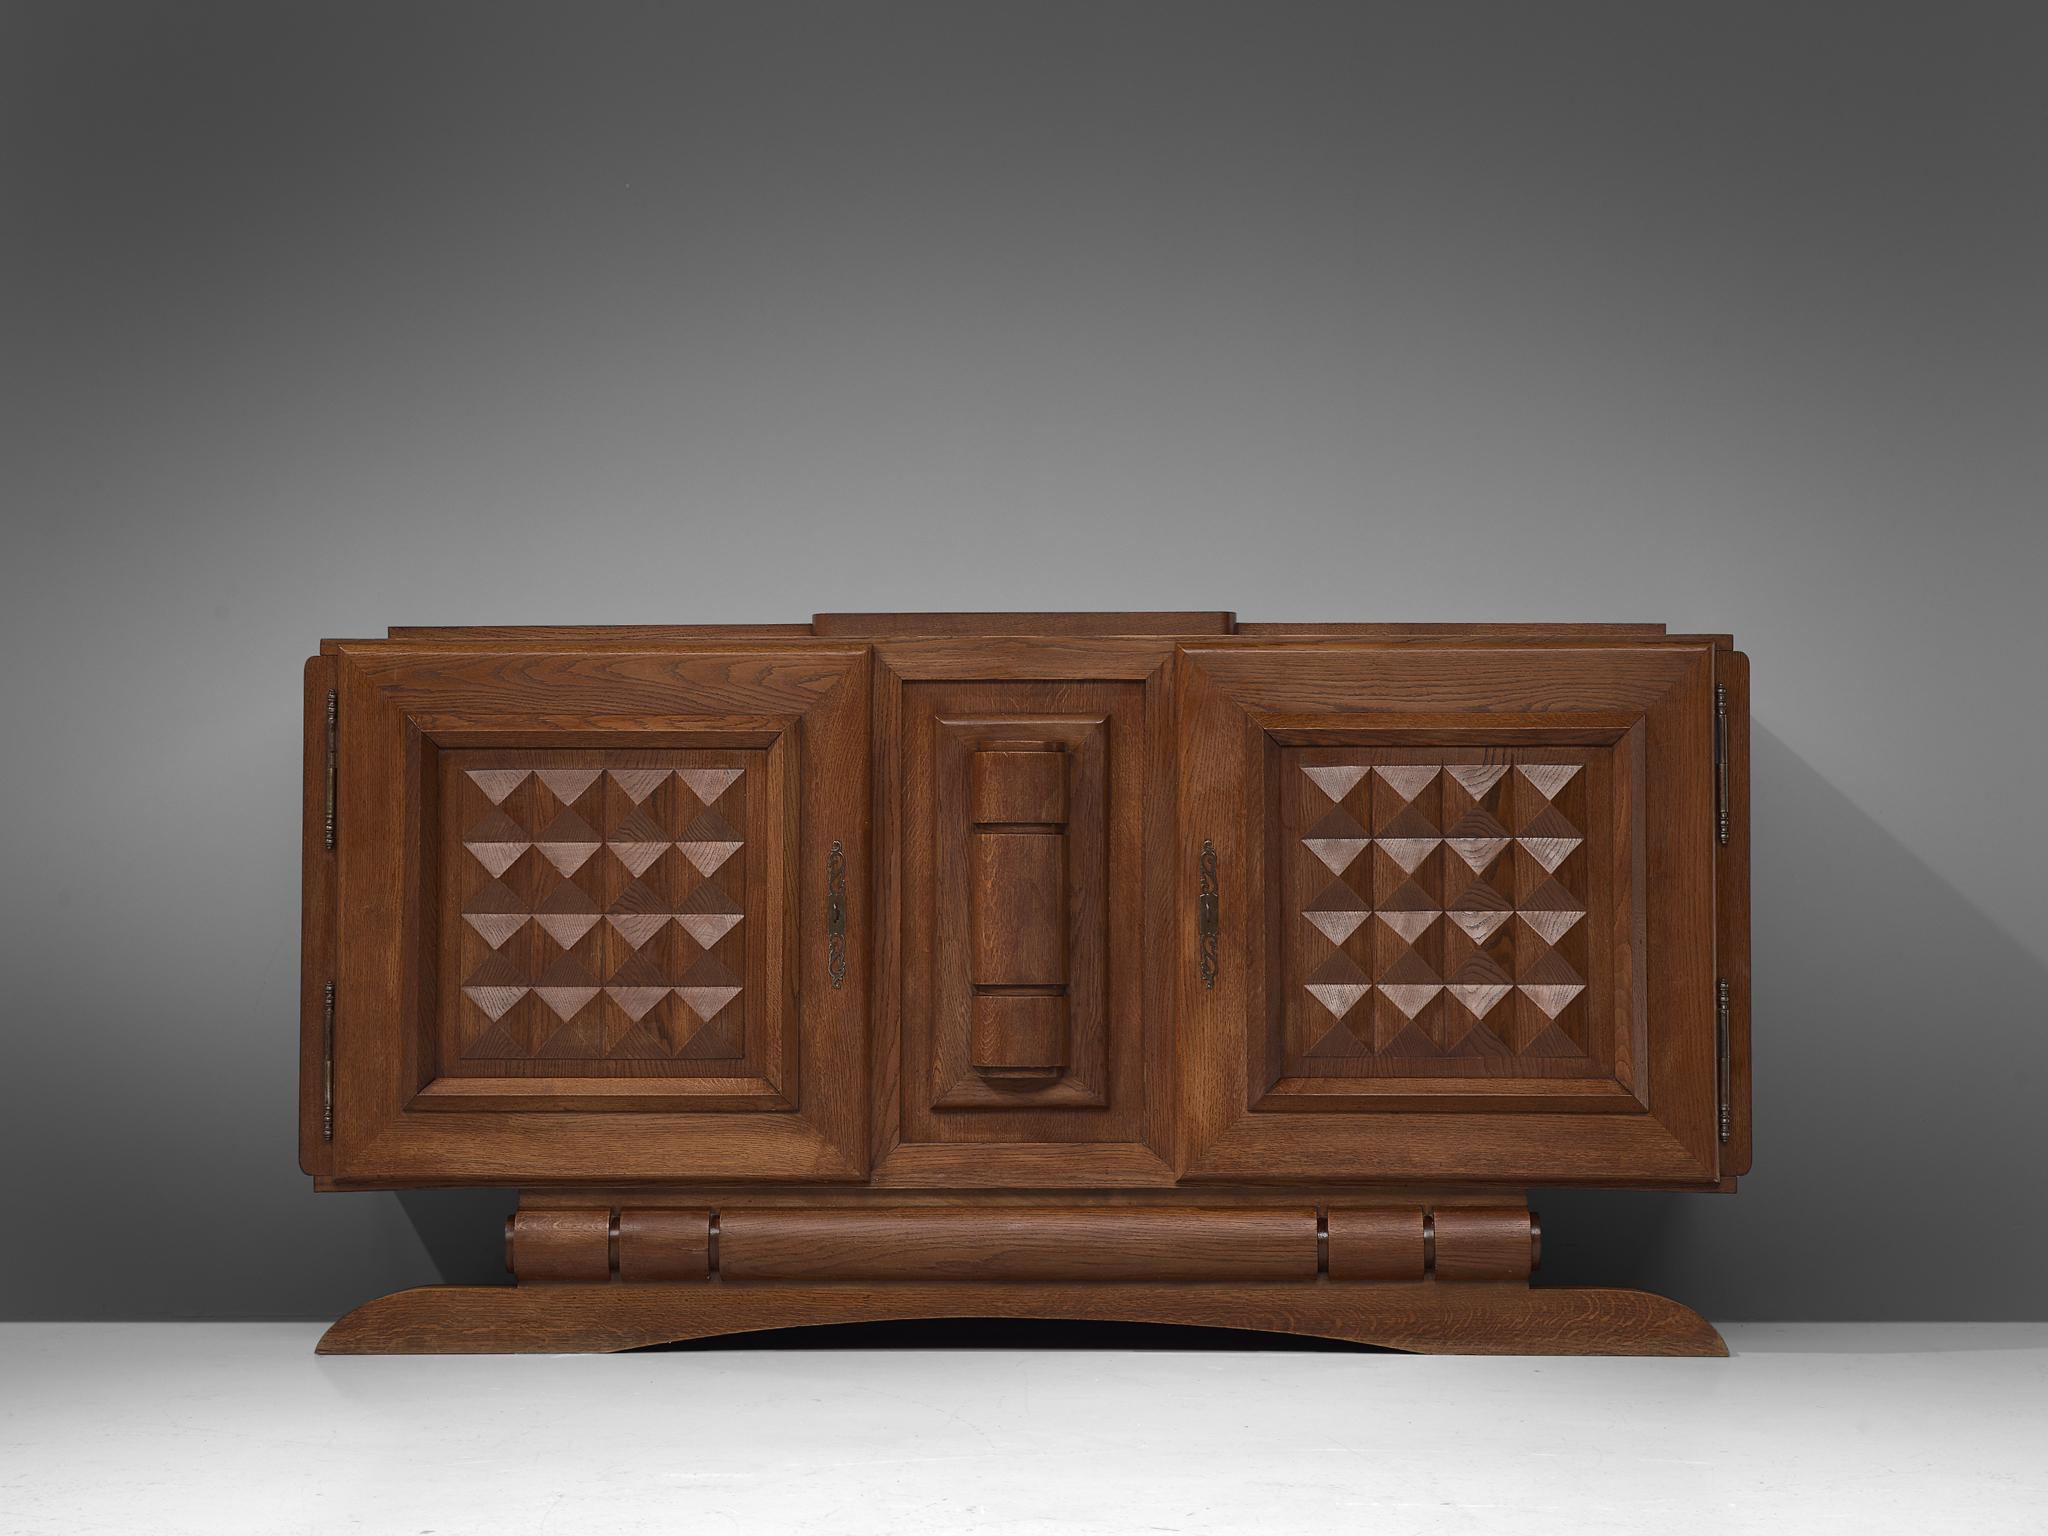 Credenza, stained oak, France, 1940s

Sturdy sideboard in oak with graphical door panels. The sideboard is equipped with several shelves behind the two doors that are finished with a graphical inlay. The door panels and base details are stunning and